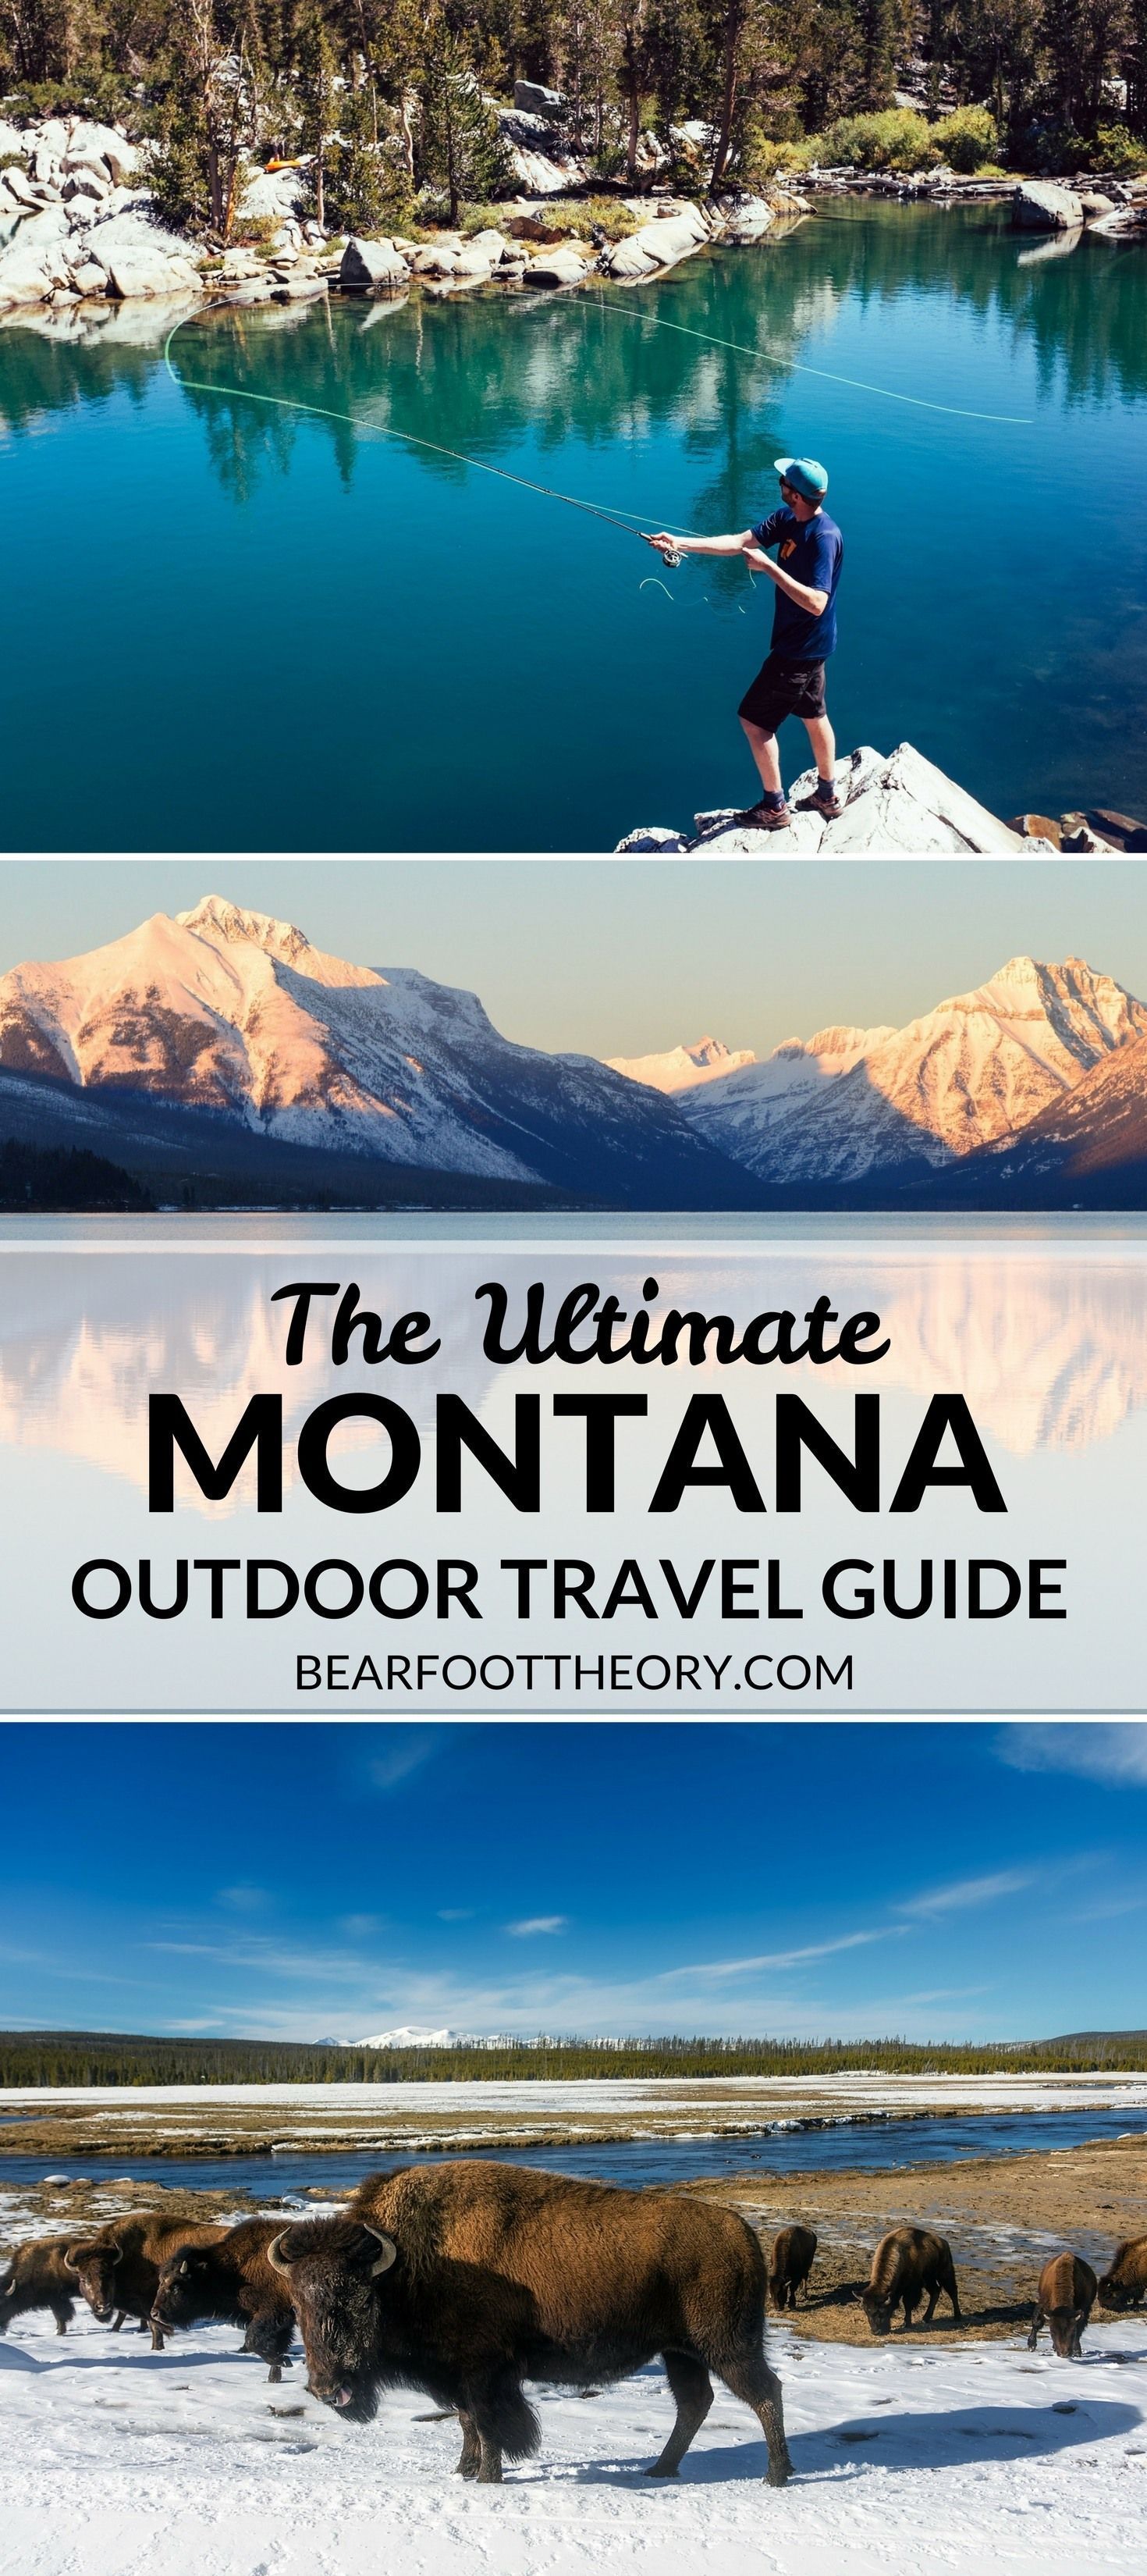 Plan an adventurous trip to Montana with our outdoor travel guide ...